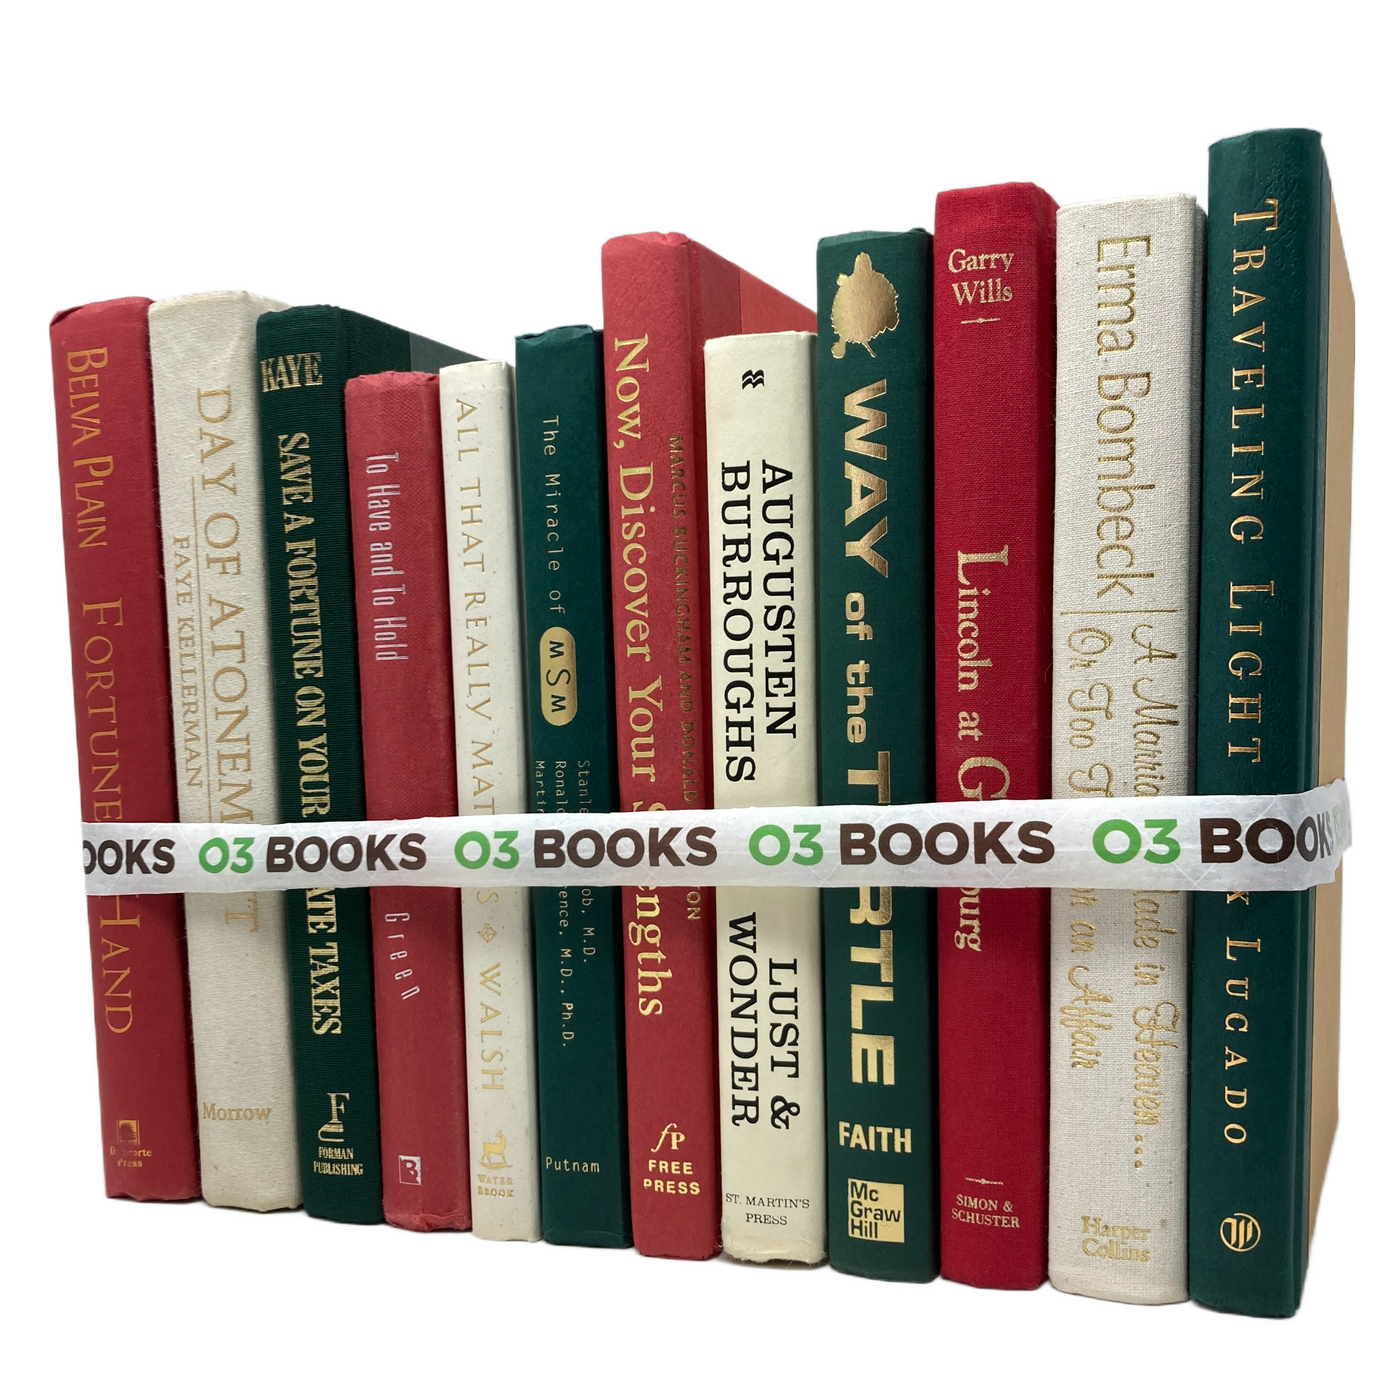 Snowy Sunset Decorative Books Red Crème and Green